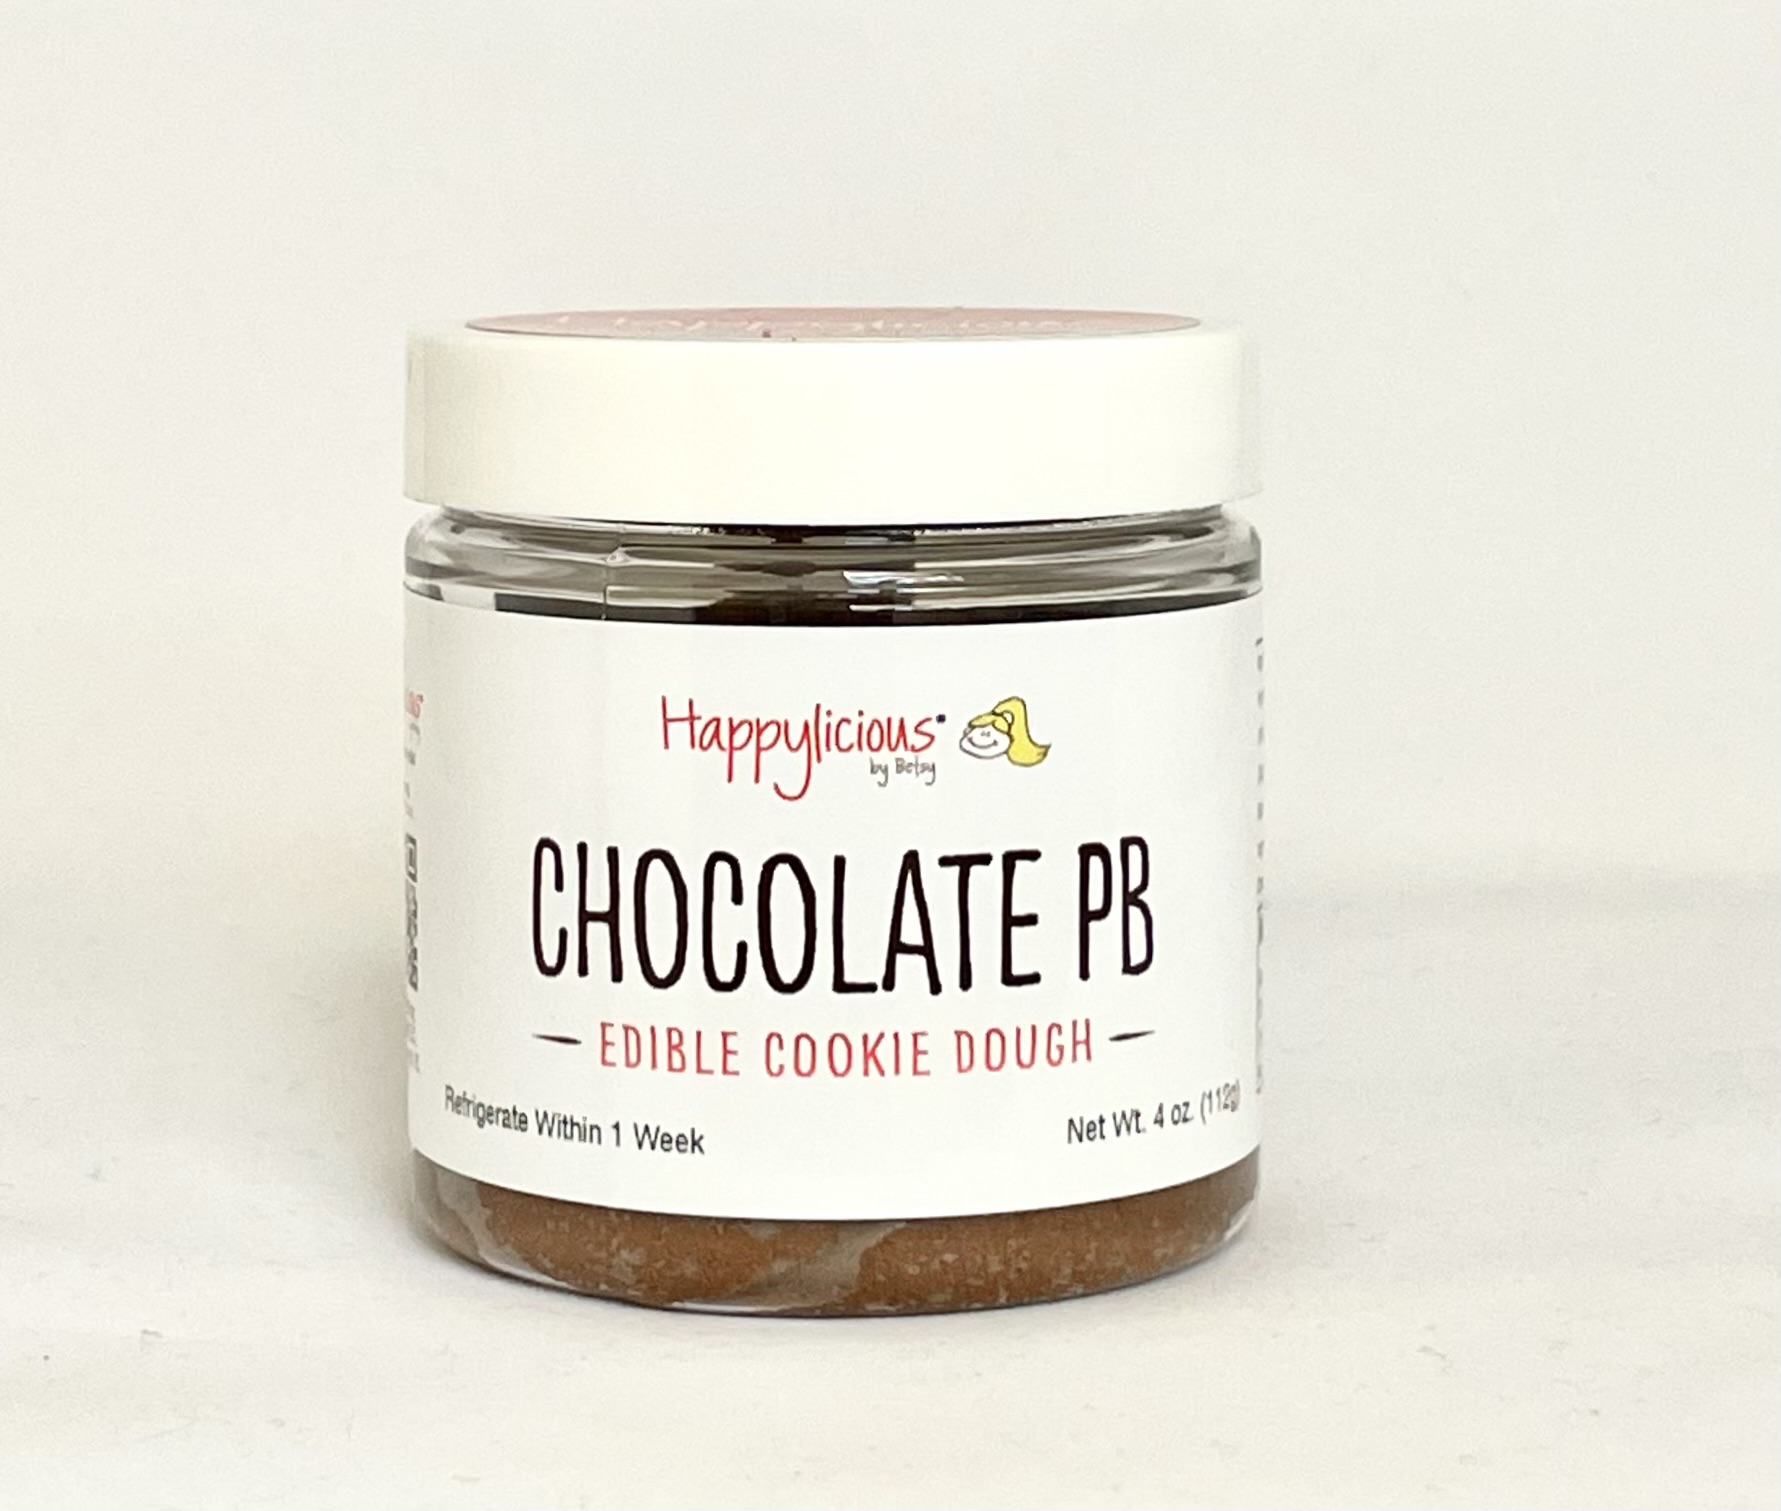 Chocolate PB Edible Cookie Dough - Happylicious by Betsy